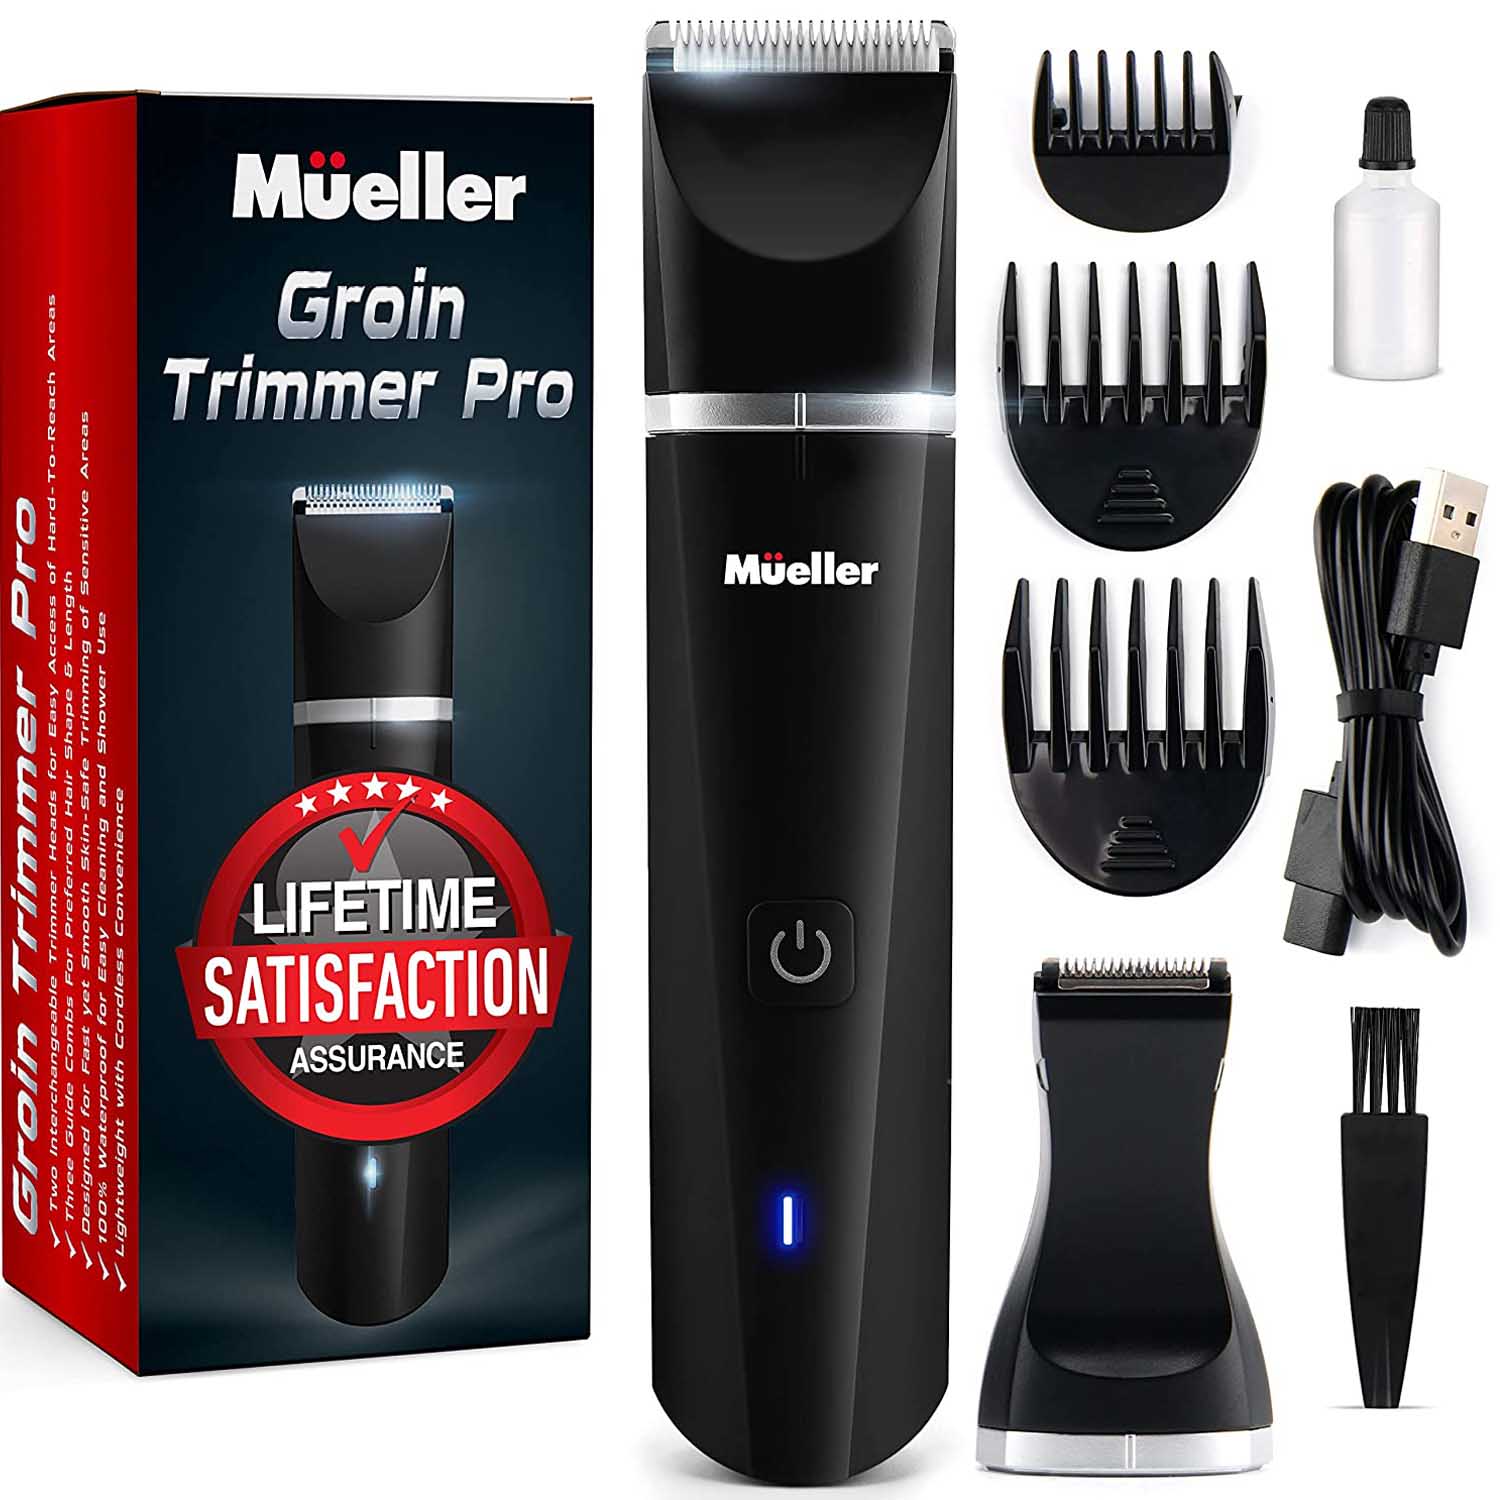 Mullerhome_Groi-Master-Pro-Hair-Trimmer-